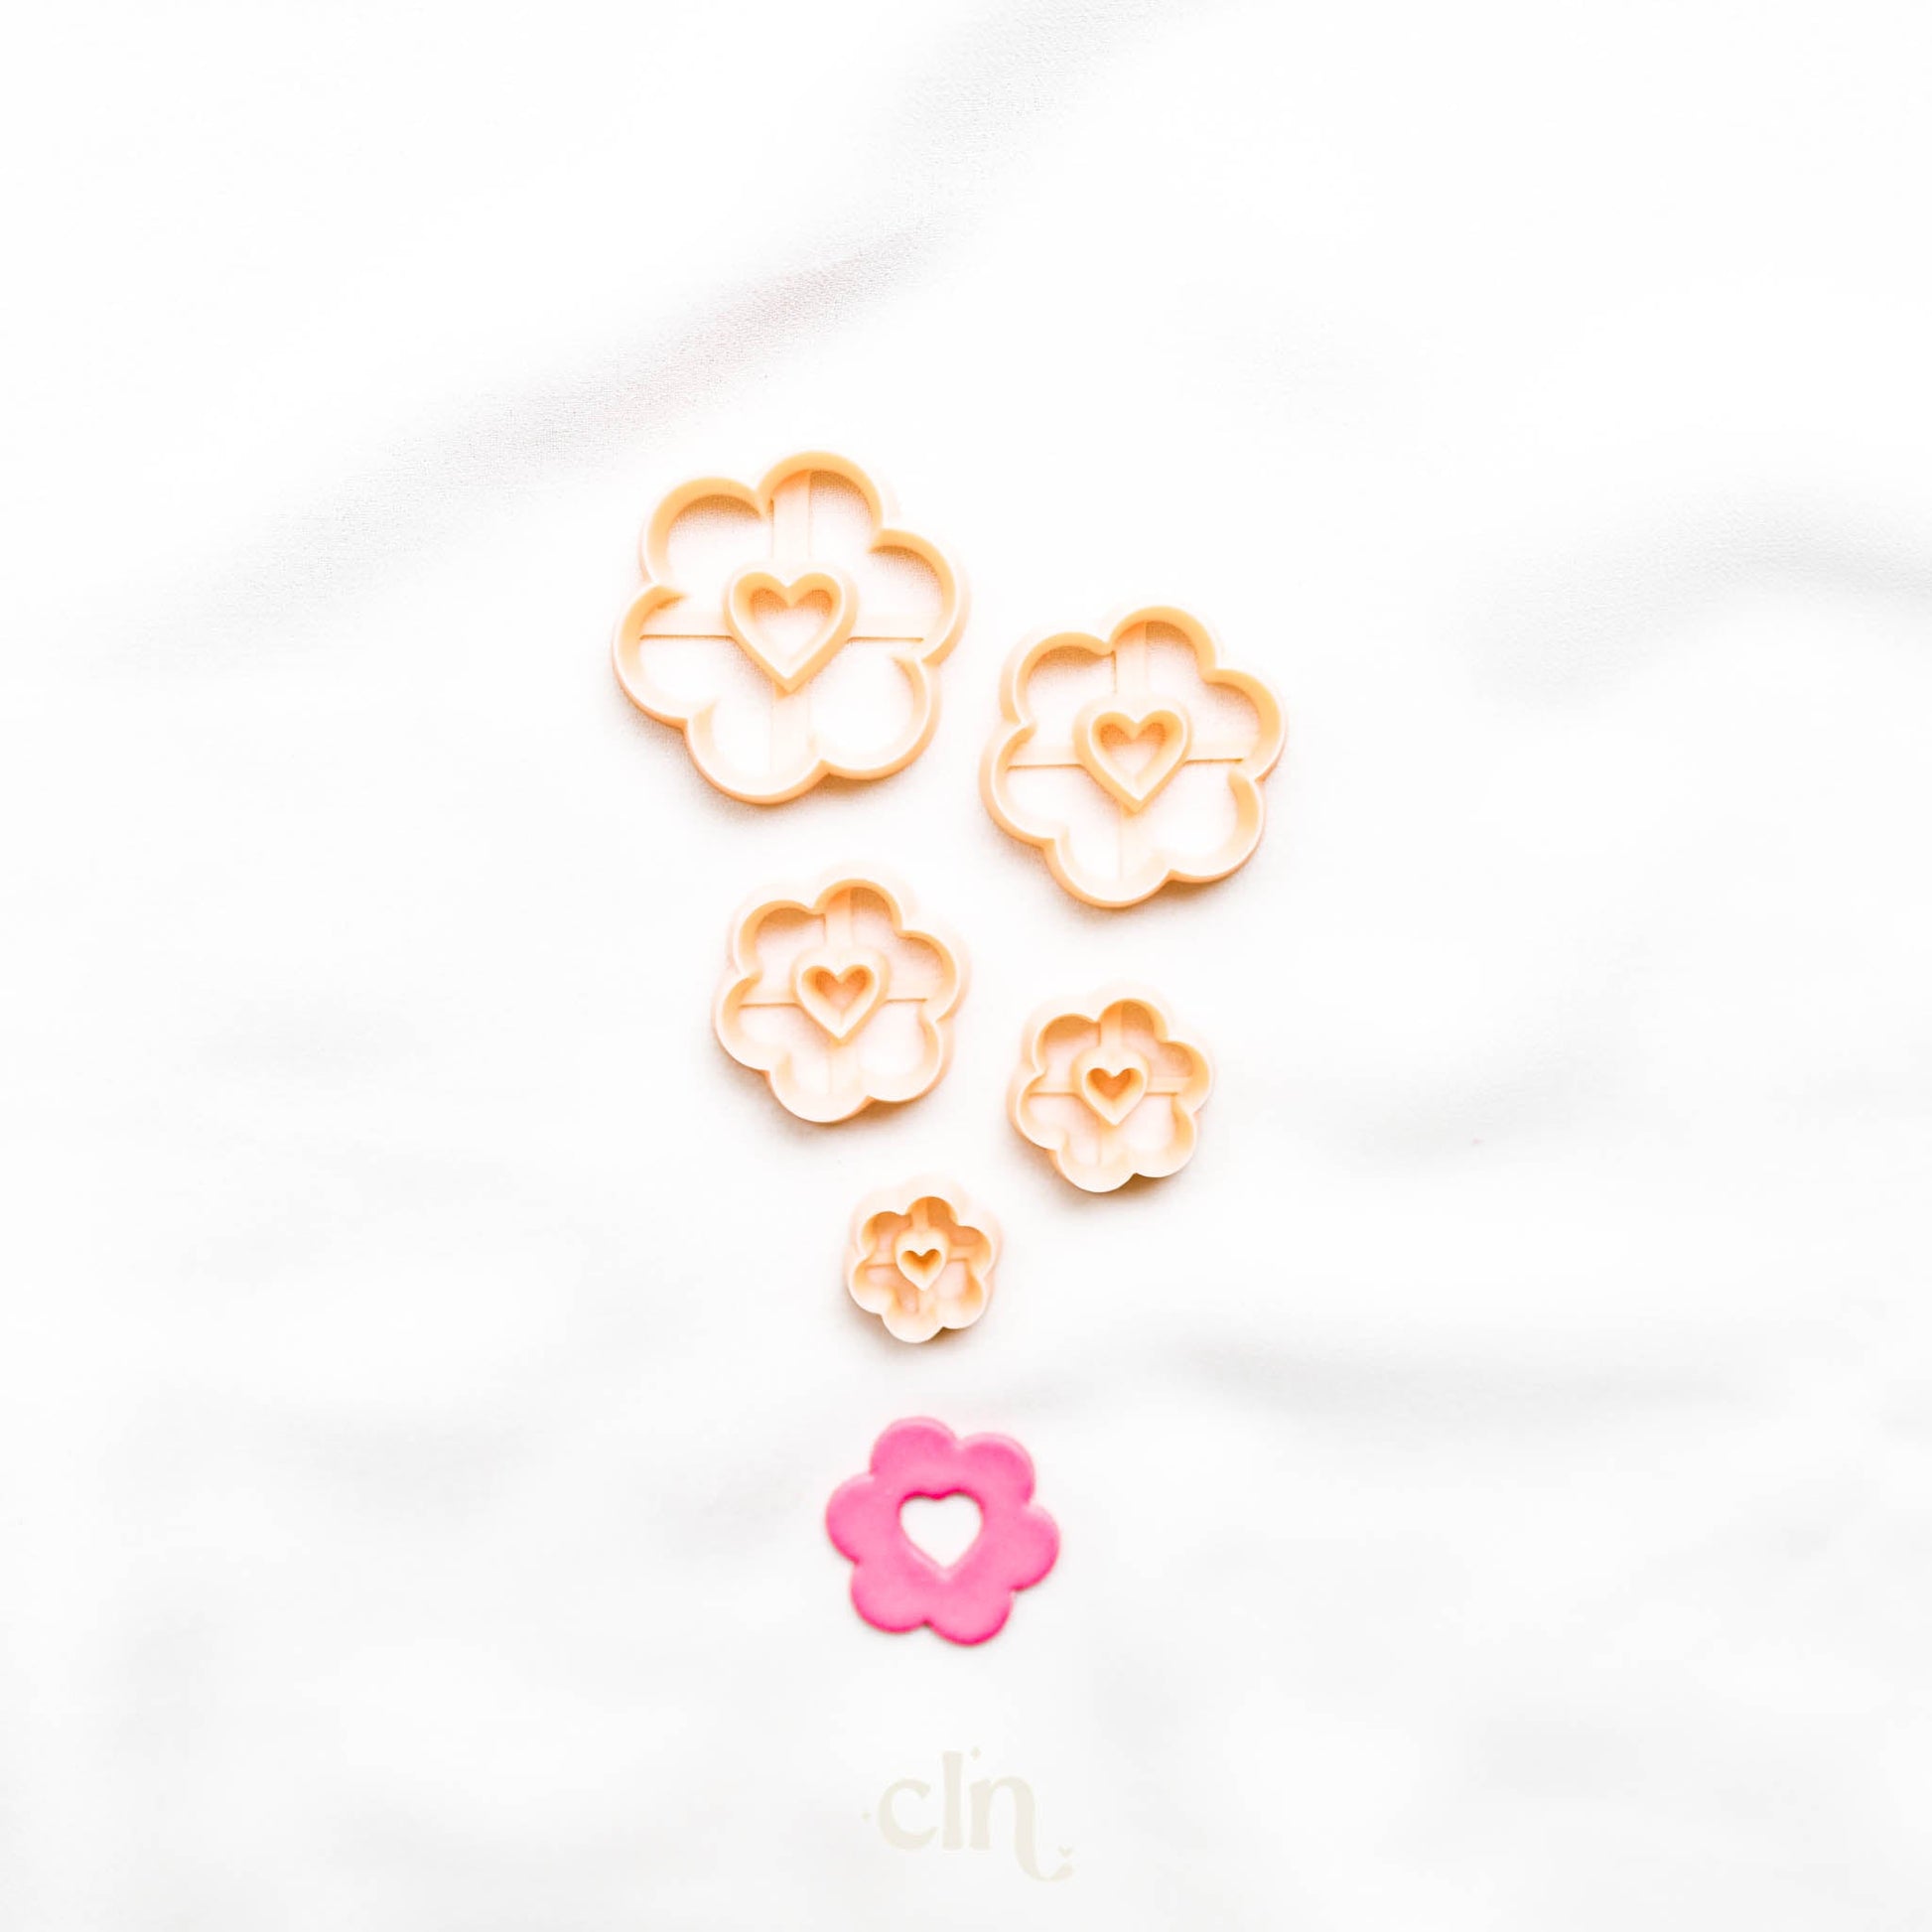 Donut Daisy with heart - Cutter - CLN Atelier